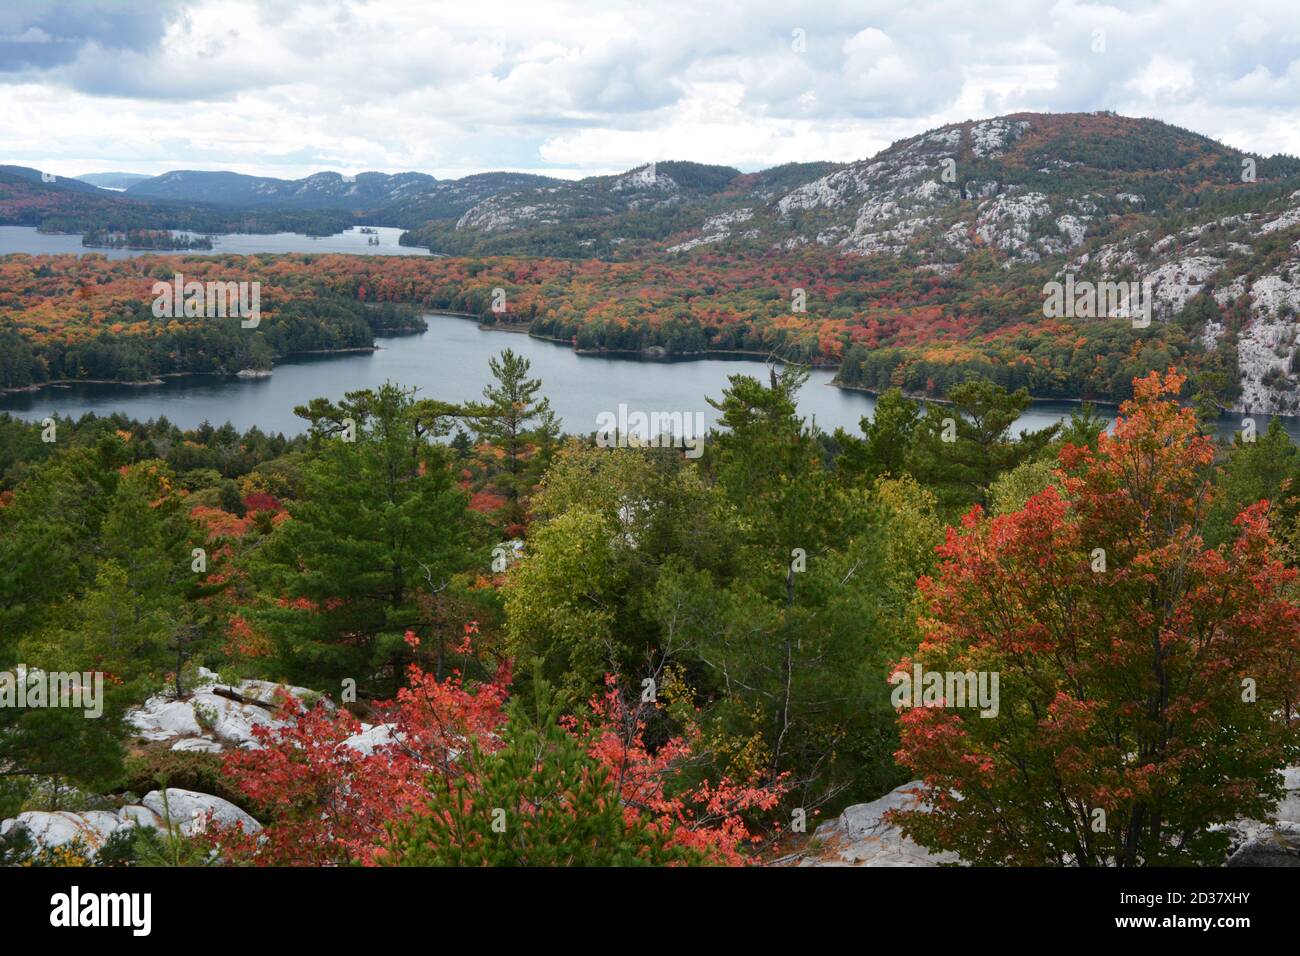 The view of Killarney Lake and the quartzite La Cloche Mountains from the top of The Crack hiking trail, Killarney Provincial Park, Ontario, Canada. Stock Photo